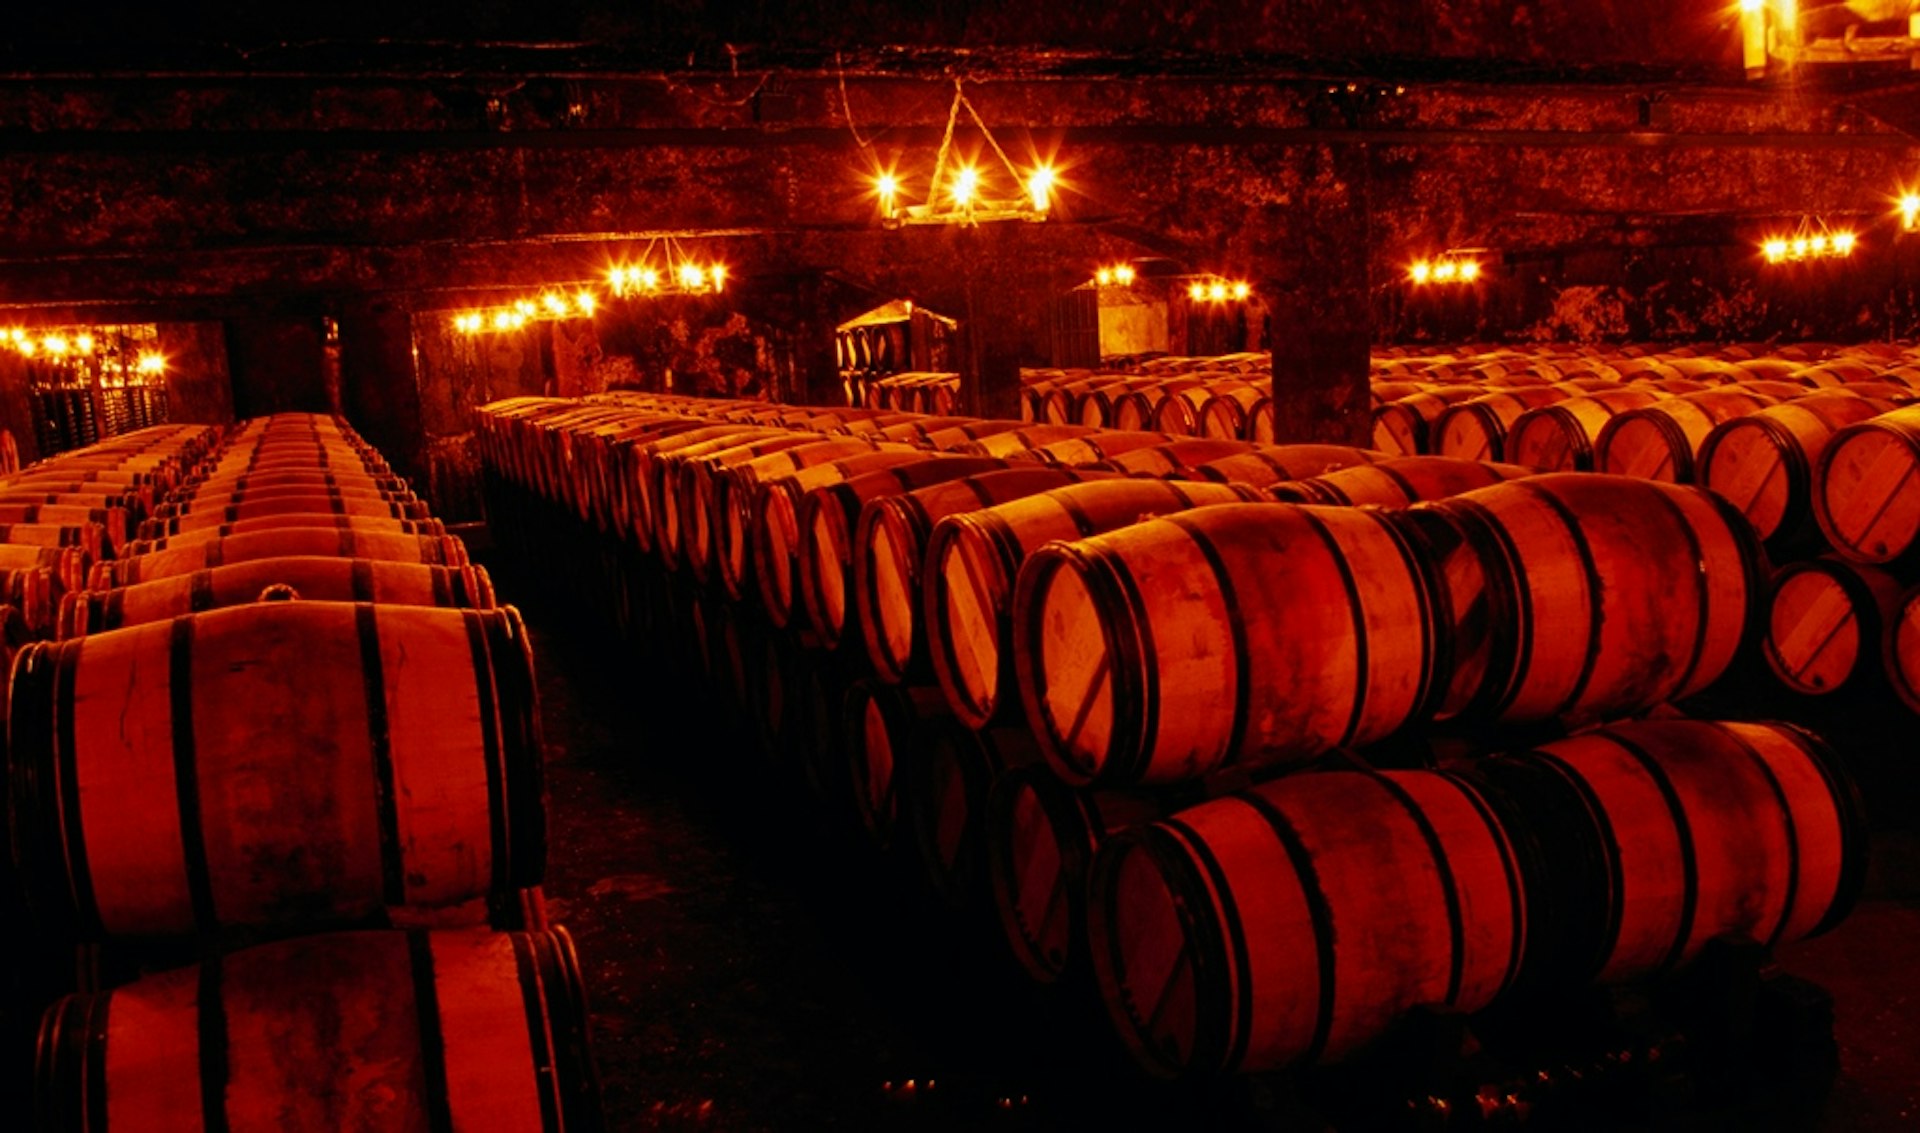 Explore the cellars of a historic chateaux. Image © Oliver Strewe / Lonely Planet Images / Getty